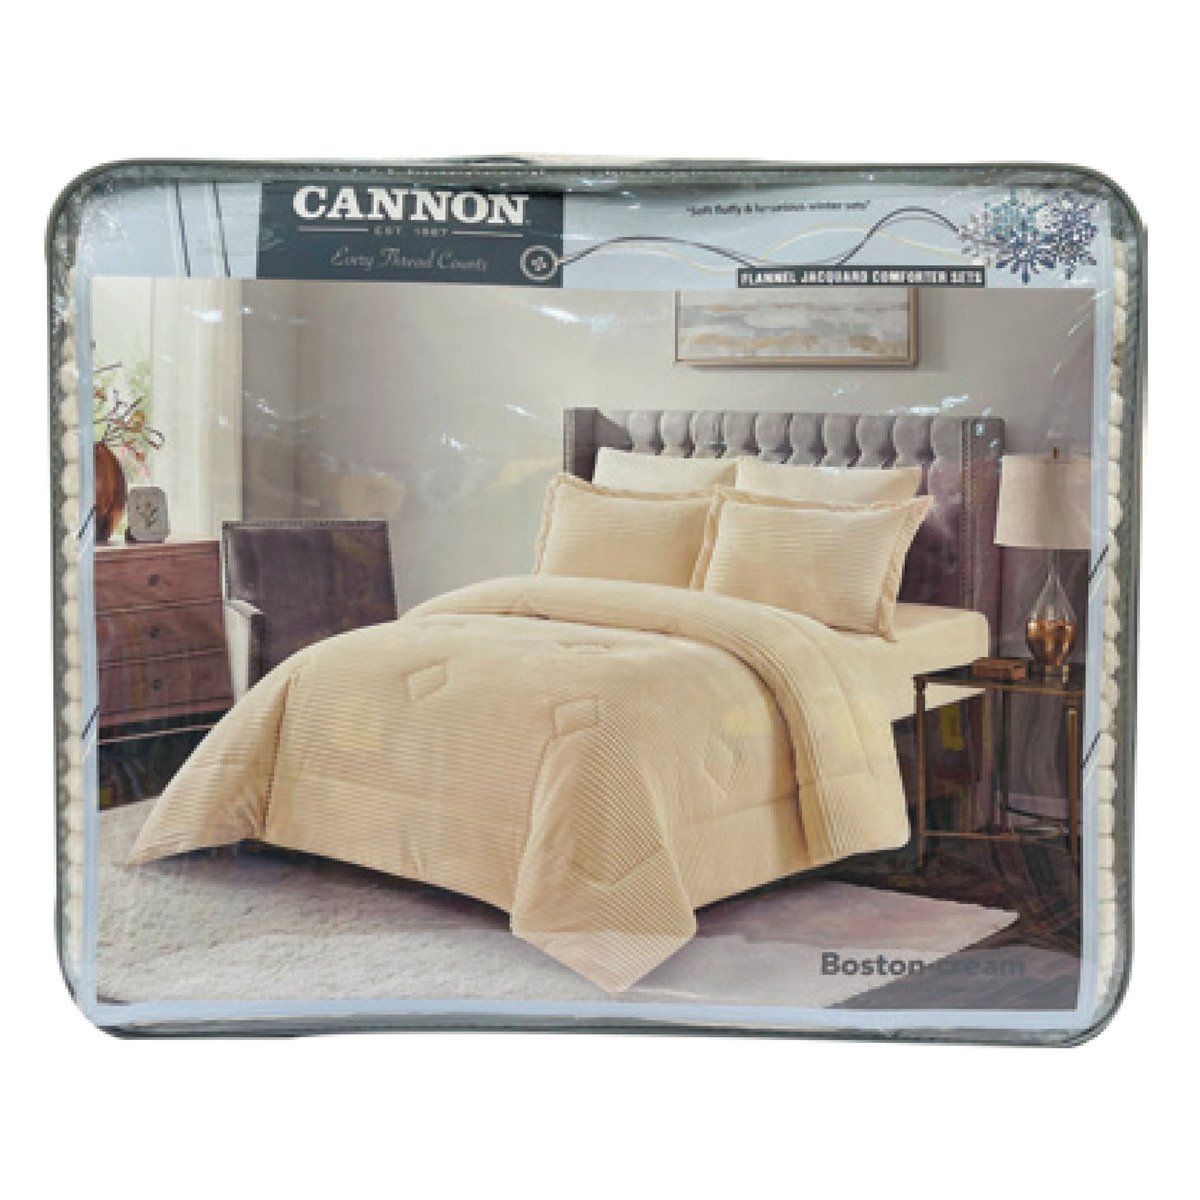 Cannon Comforter King 6pc Set Assorted